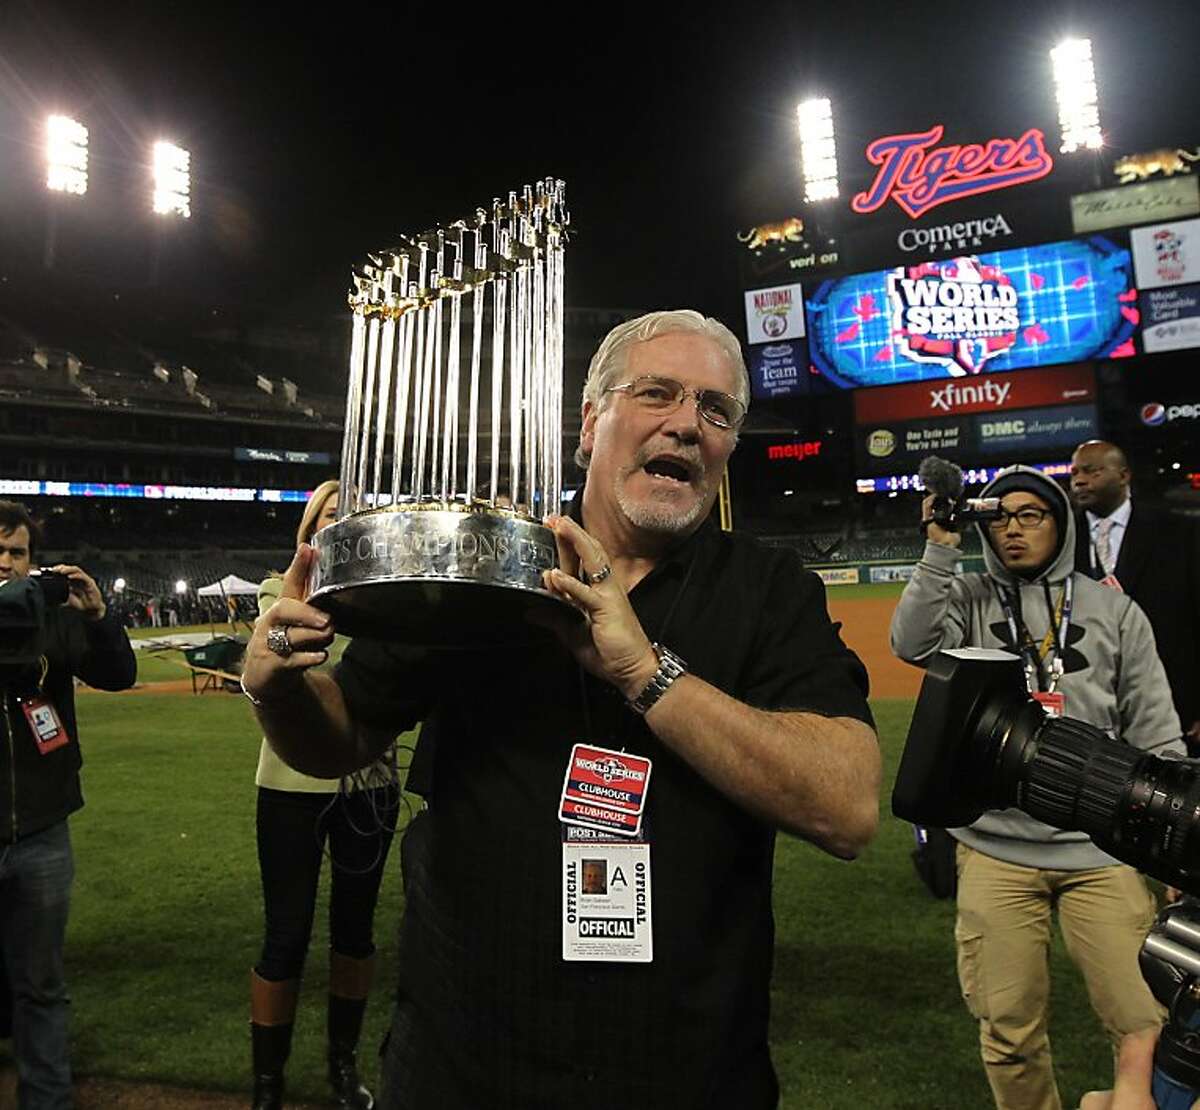 Brian Sabean holds the championship trophy after game 4 of the World Series at Comerica Park on Sunday, Oct. 28, 2012 in Detroit, MI.